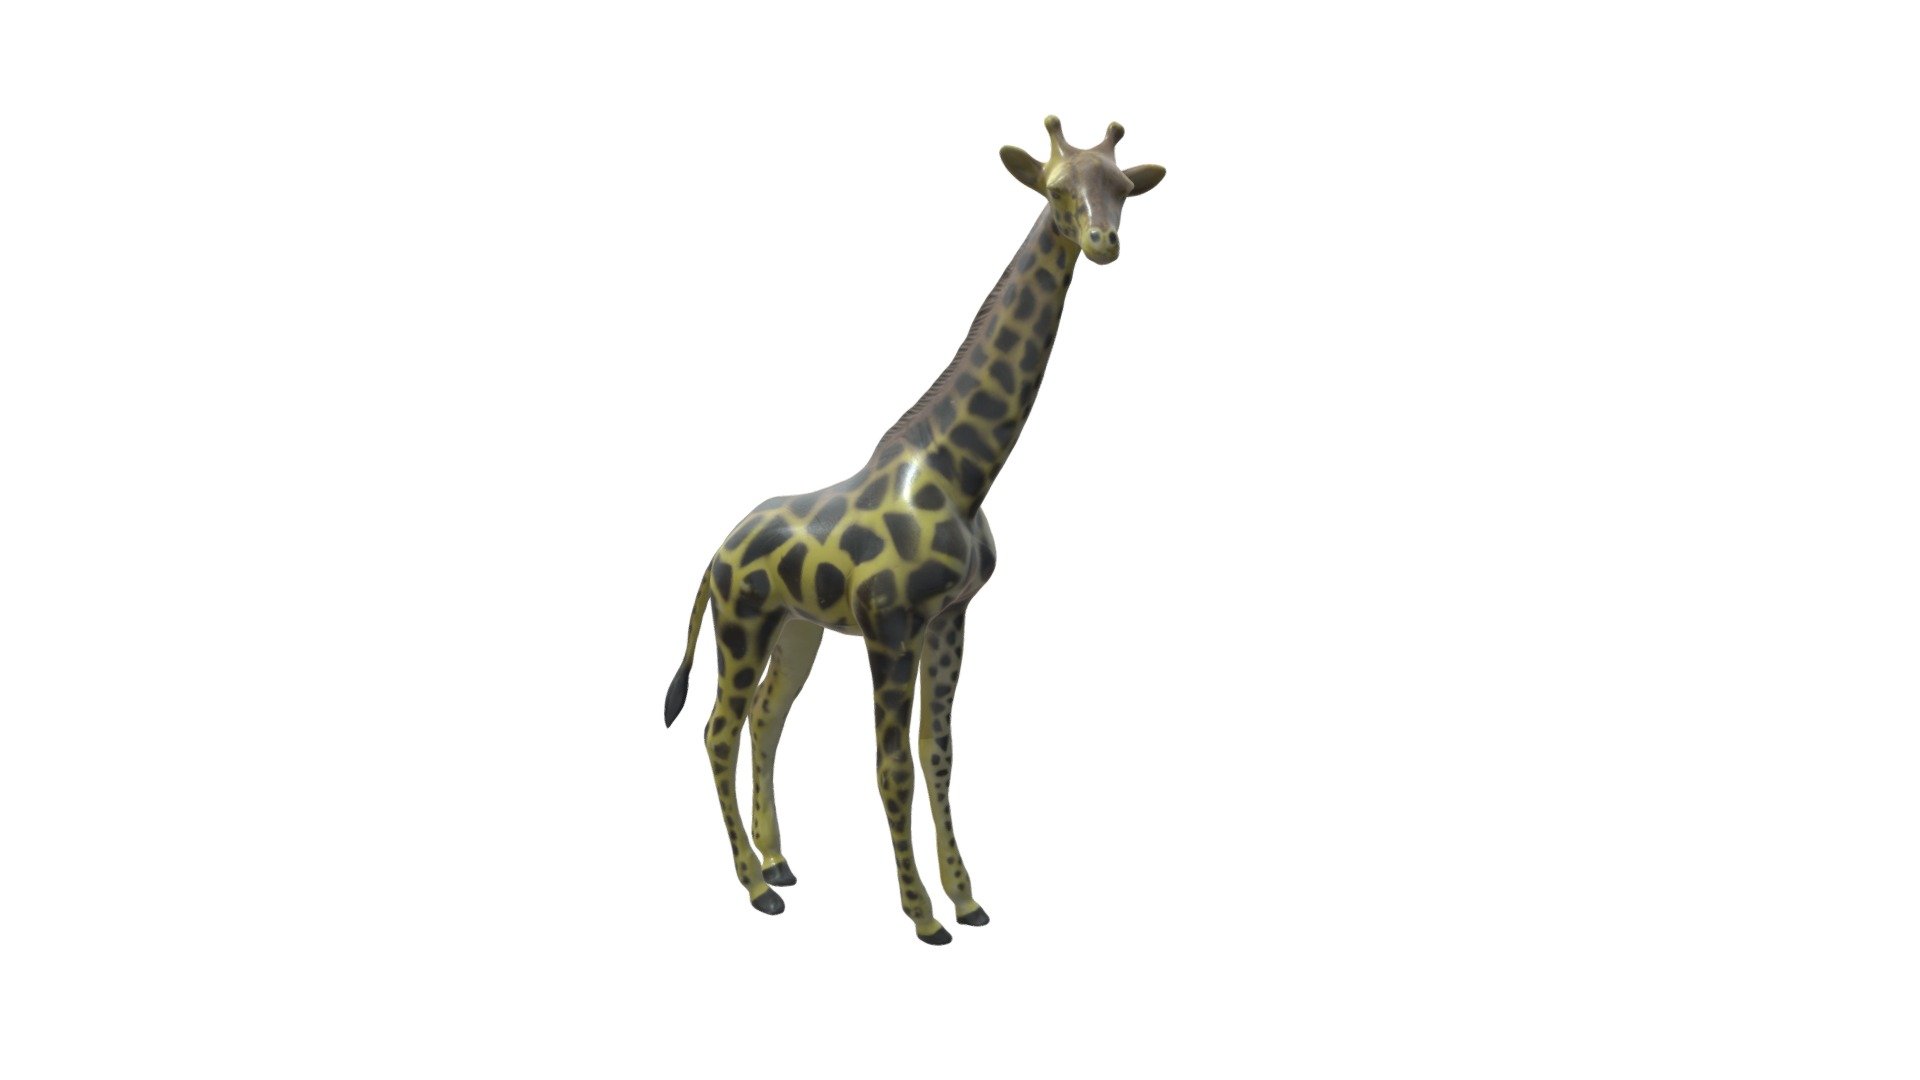 A toy giraffe made using photogrammetry (Reality Capture) and cleaned up with Zbrush and Sketchfab 3d model